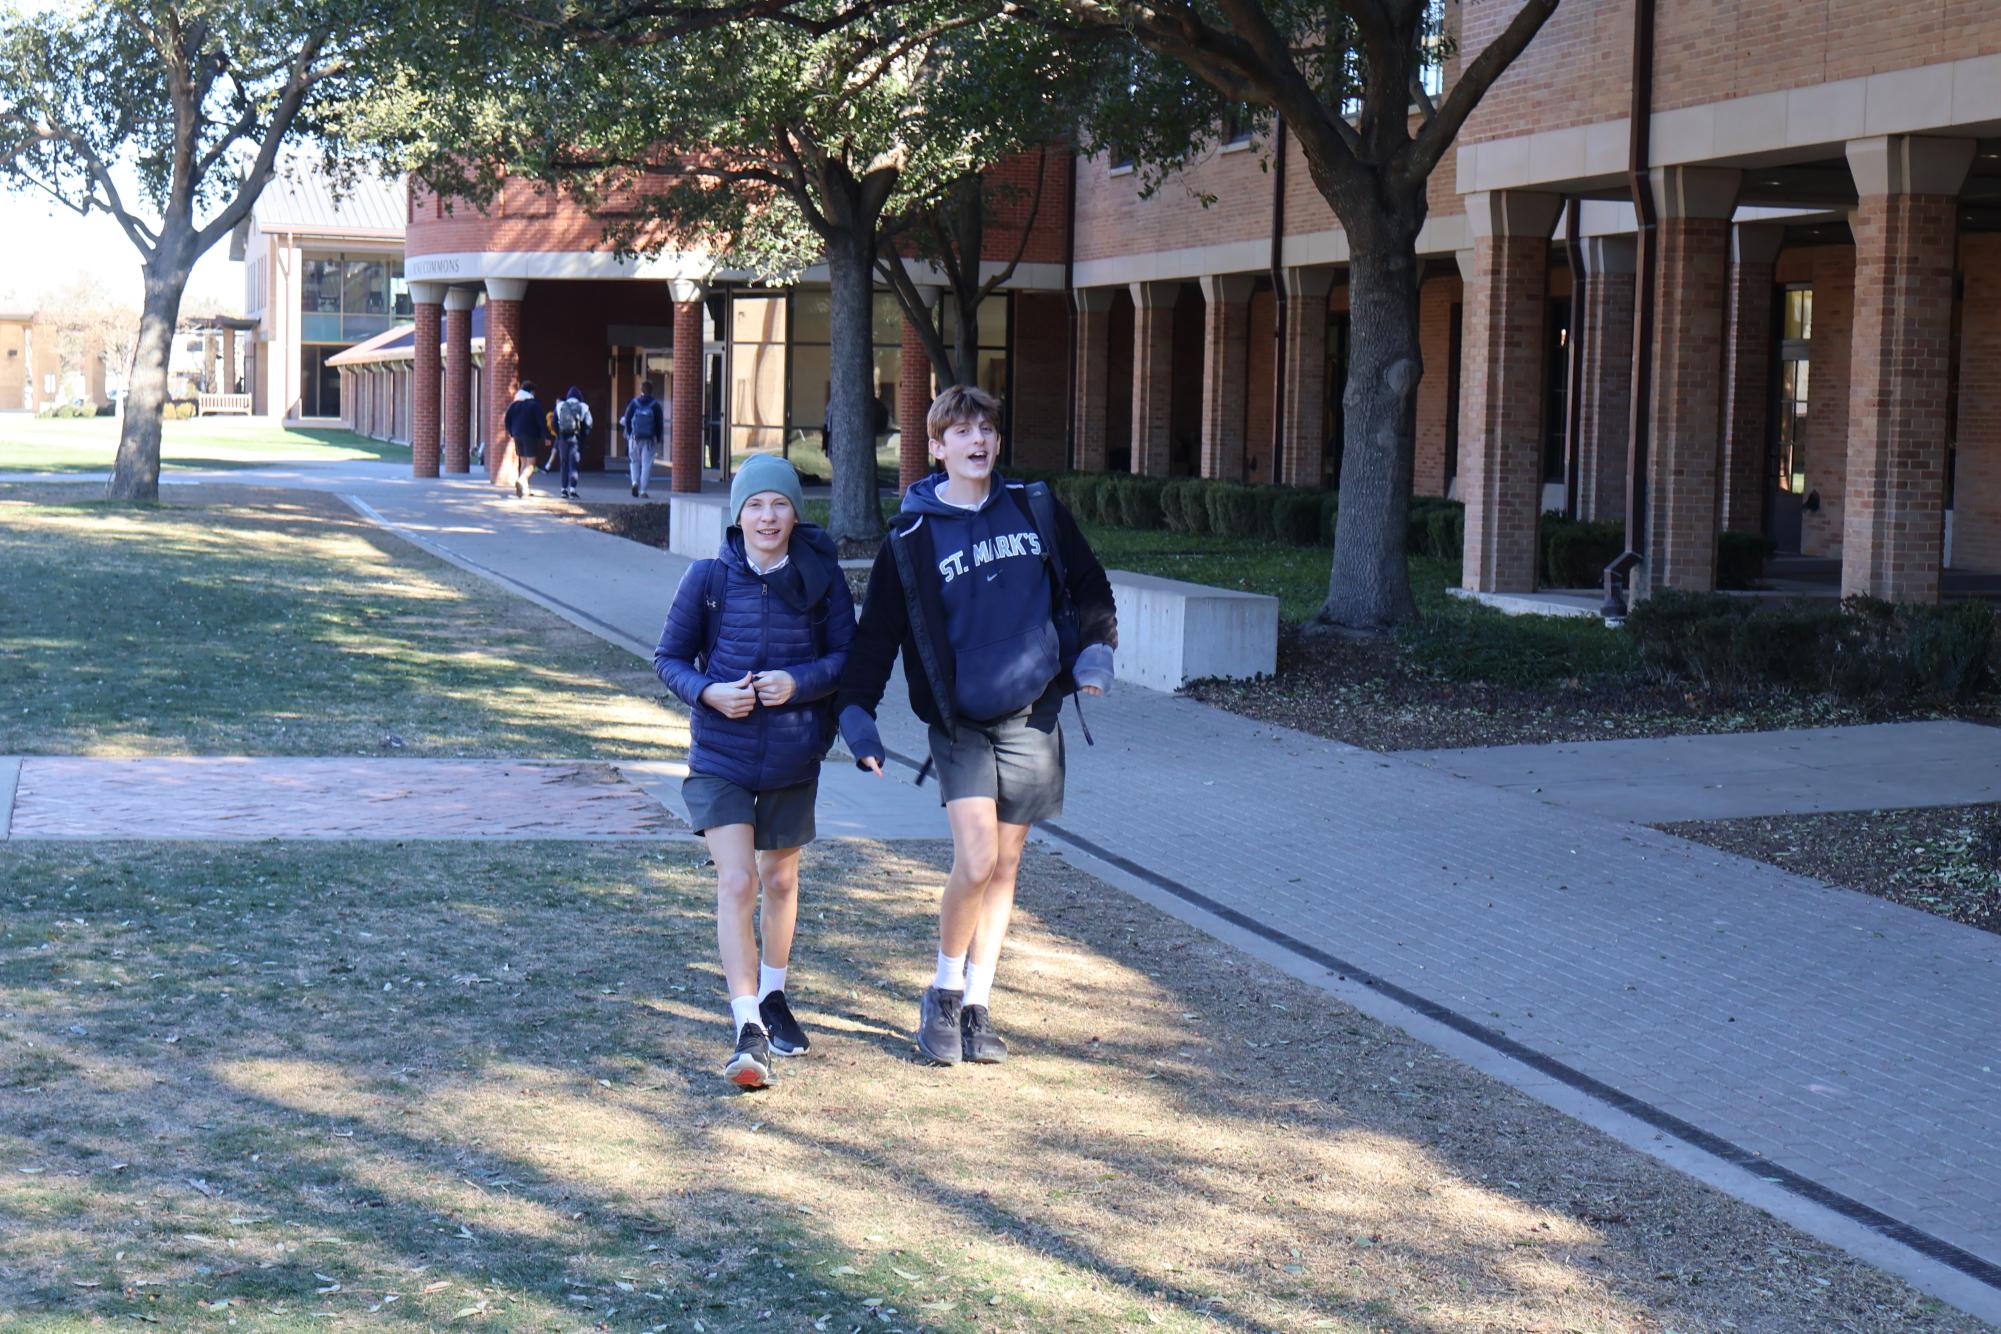 Students walk across the quad in shorts despite the freezing weather.